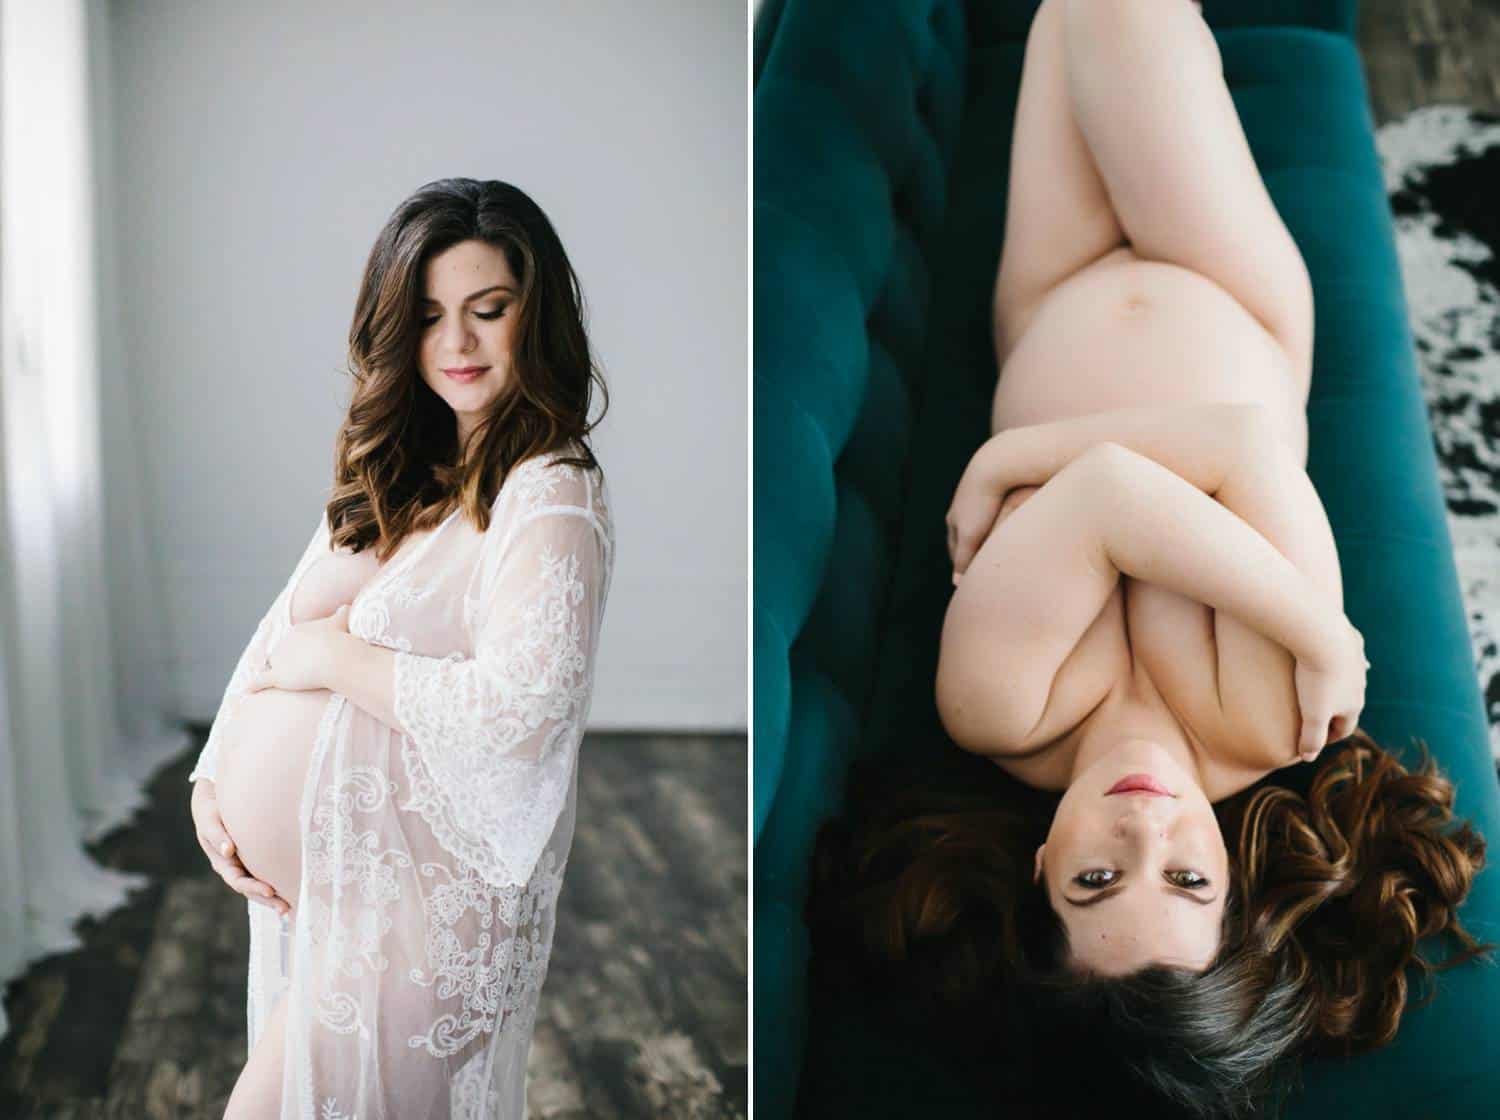 A pregnant woman poses for sensual boudoir photographs. In one, she's draped in a white lace robe with only her pregnant belly exposed. In the other, she's completely naked, using her arms and legs to cover her private parts.